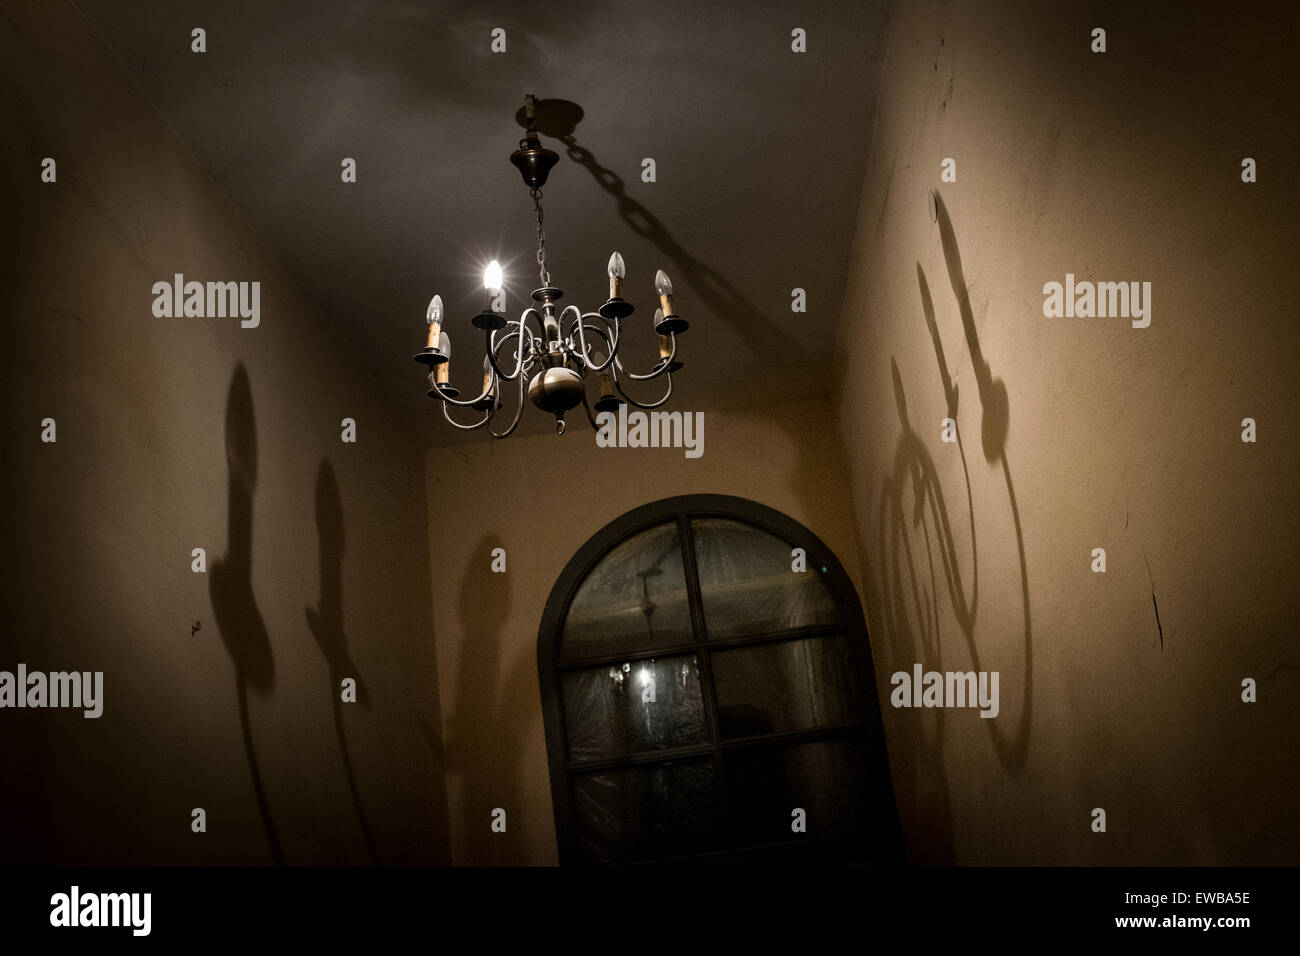 Chandelier in a room Stock Photo